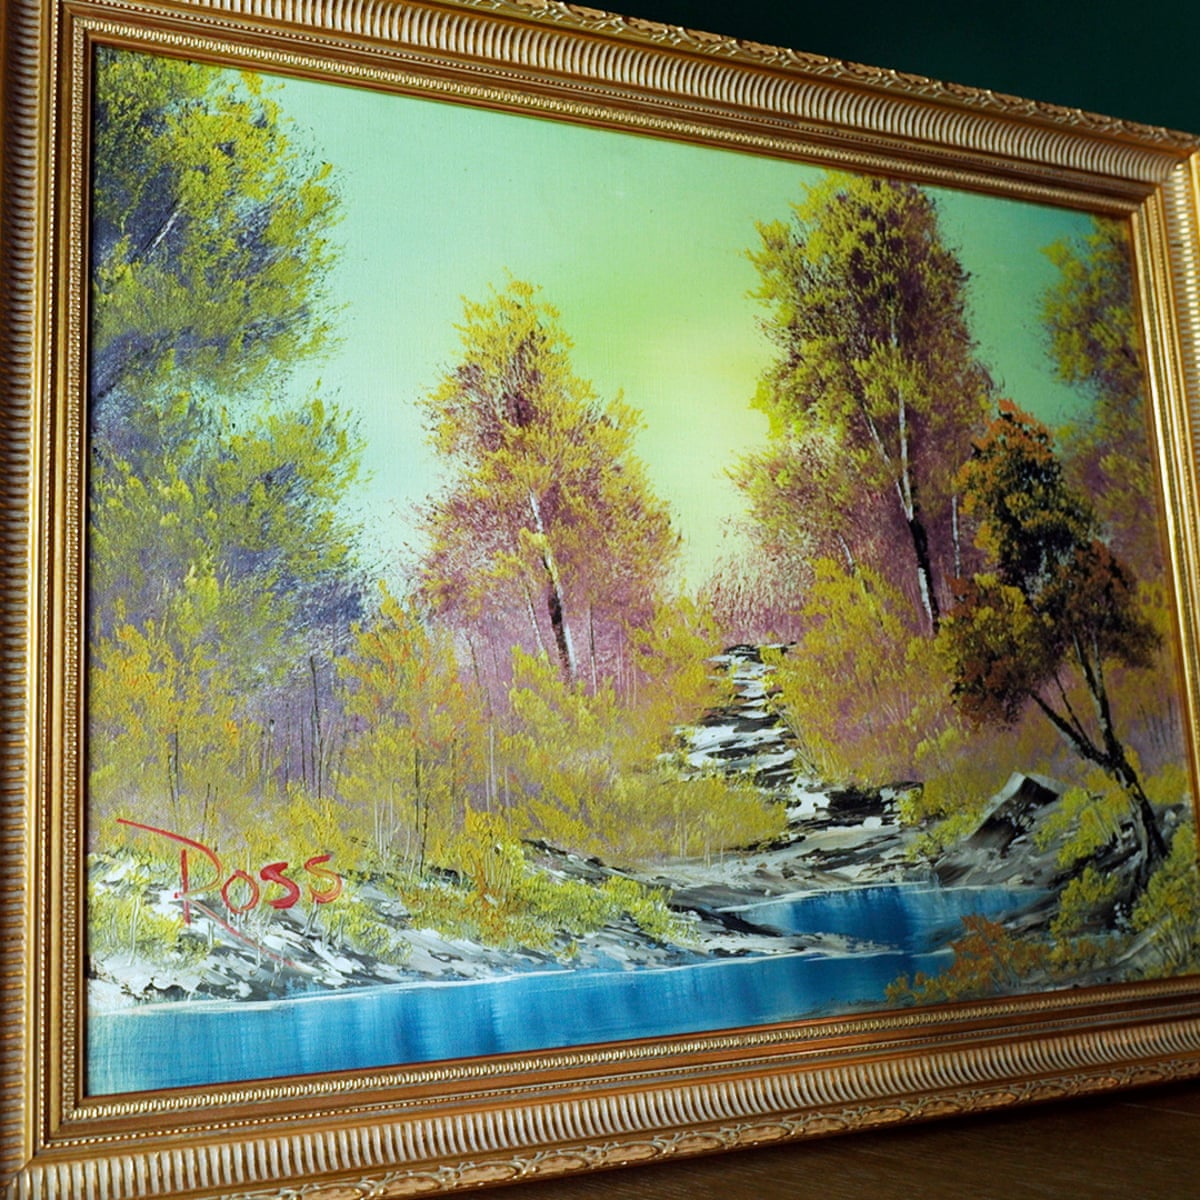 Bob Ross's first TV painting goes on sale for nearly $10m, Minnesota